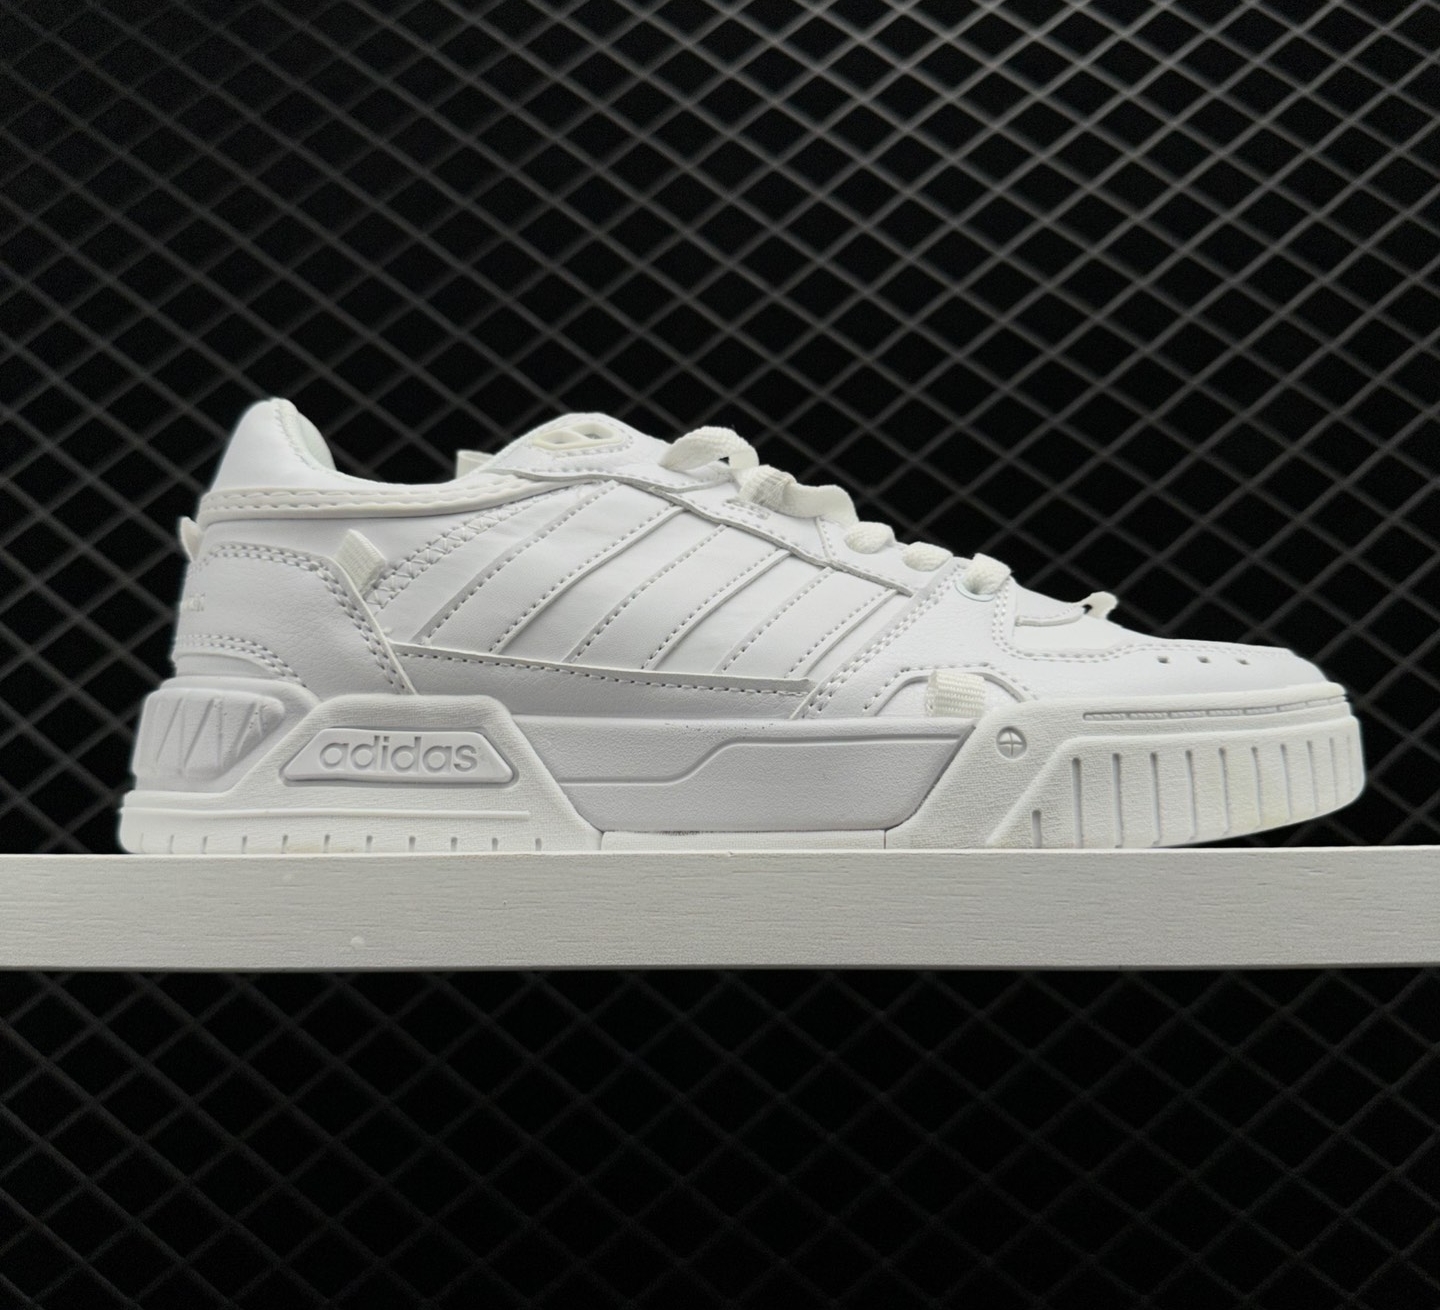 Adidas Neo D-PAD Lifestyle Shoes 'Cloud White' - Stylish and Trendy Footwear for an Active Lifestyle.